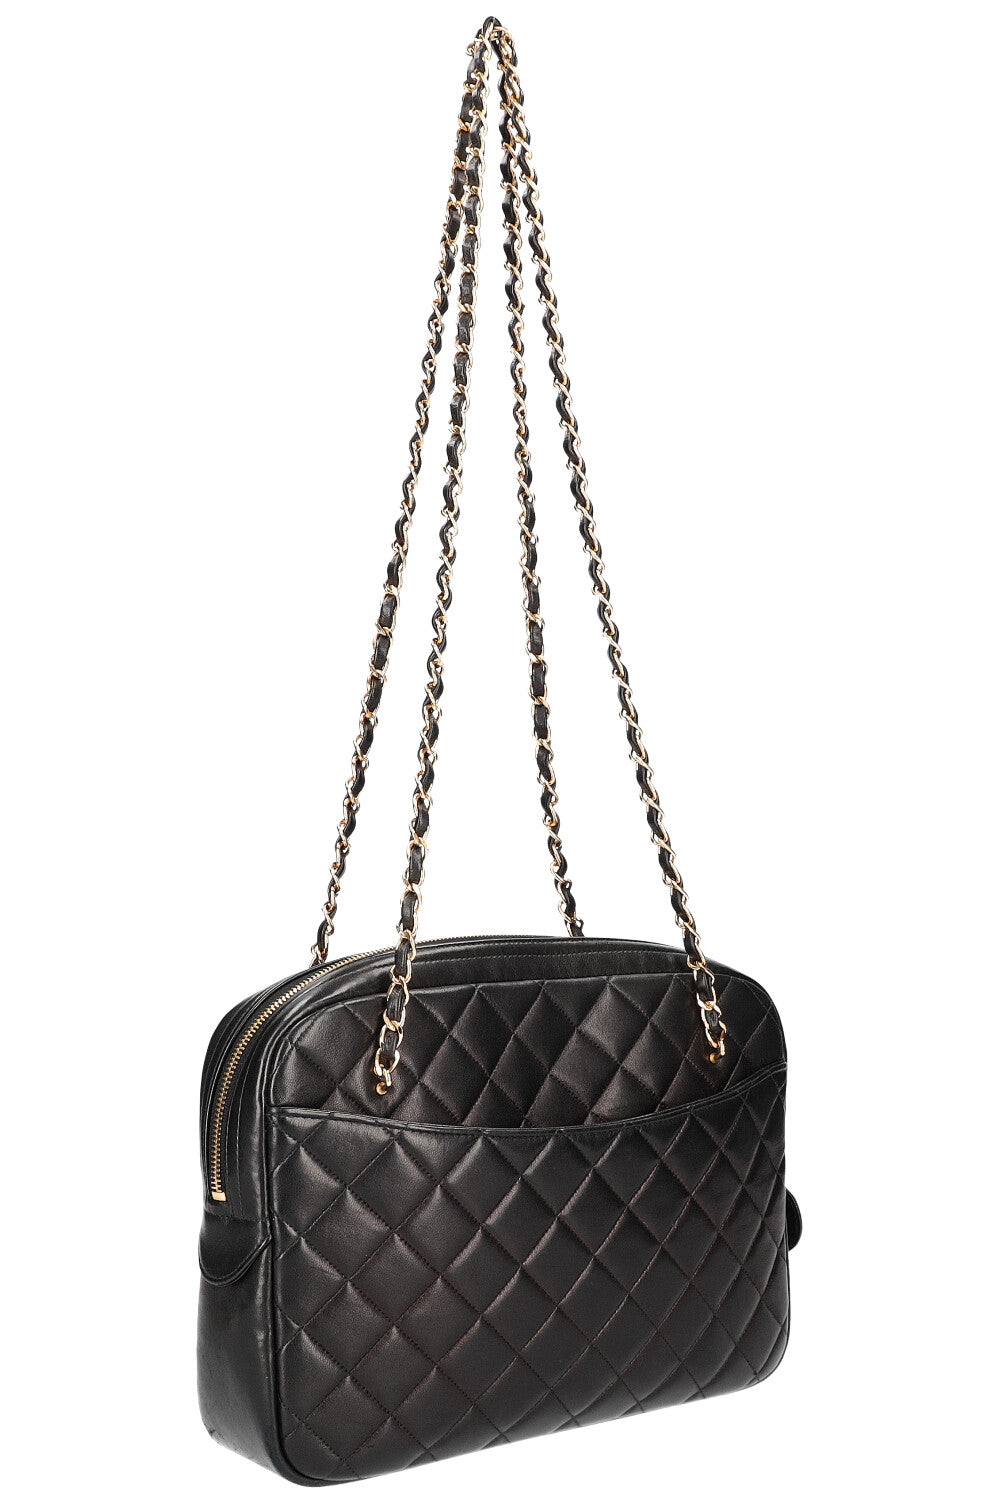 CHANEL Quilted Camera Bag Black